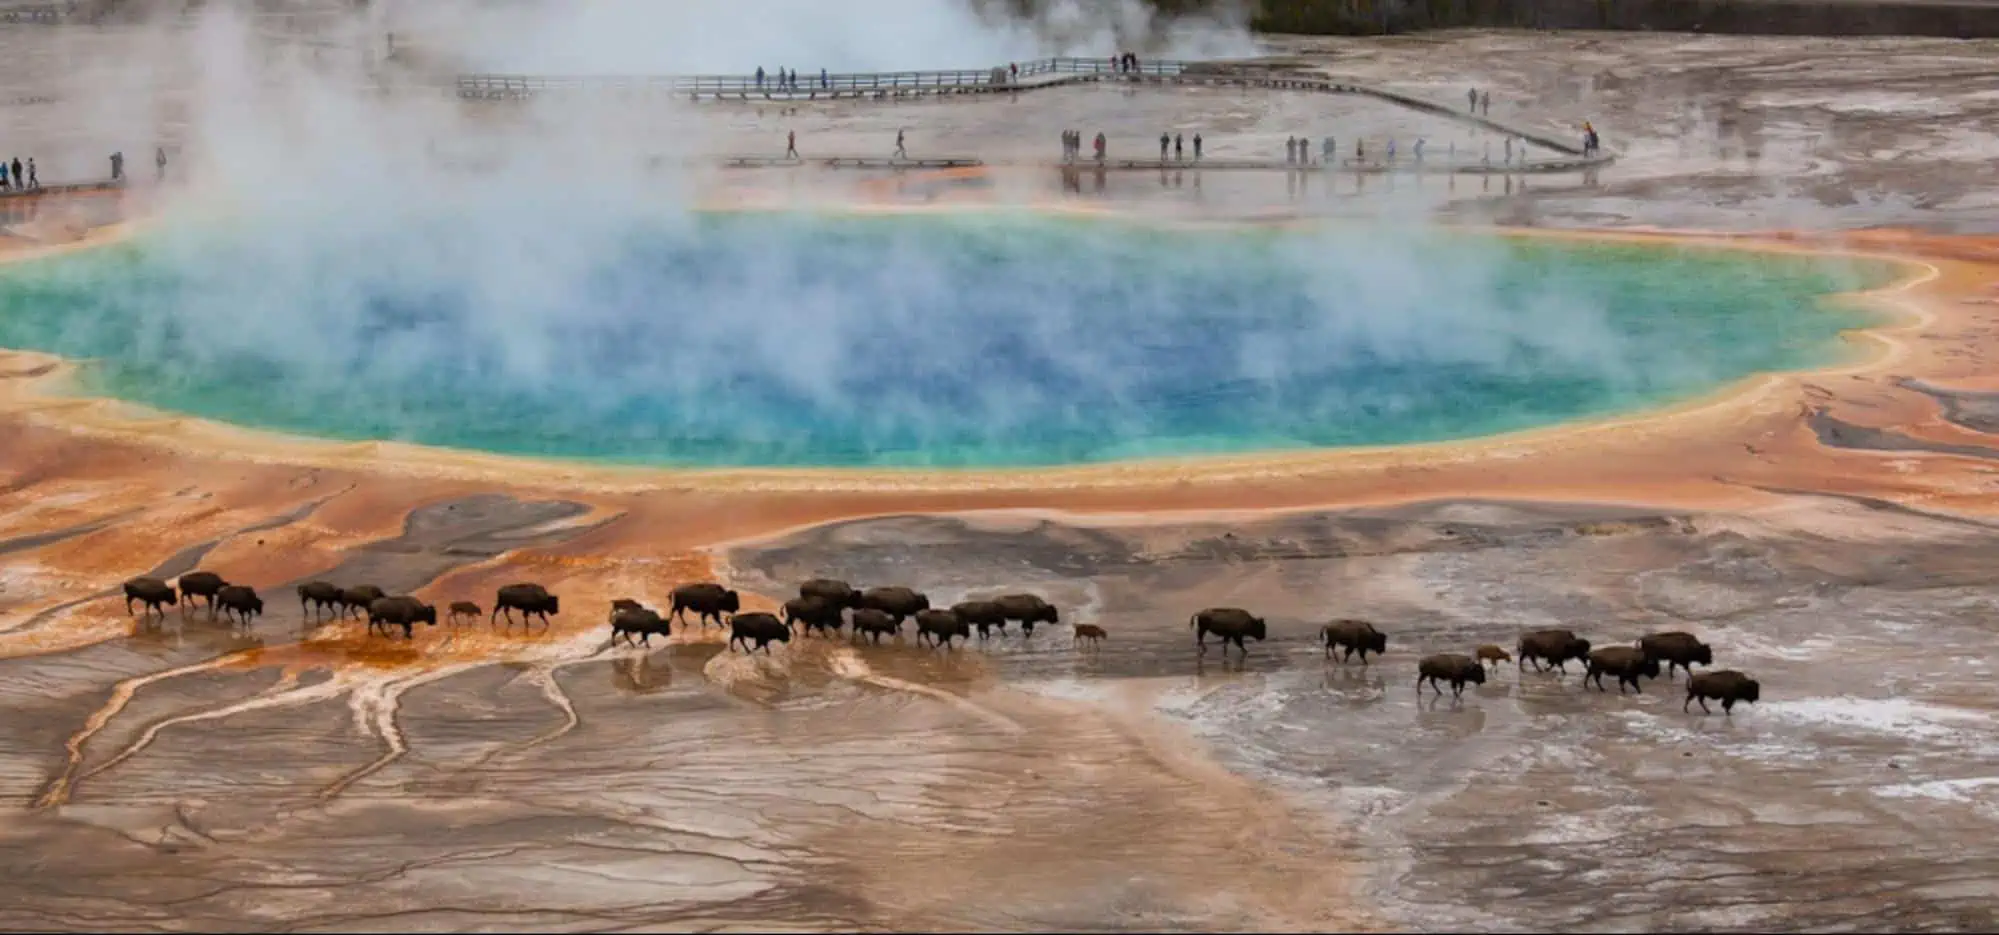 Photograph of a hot pool at Yellowstone